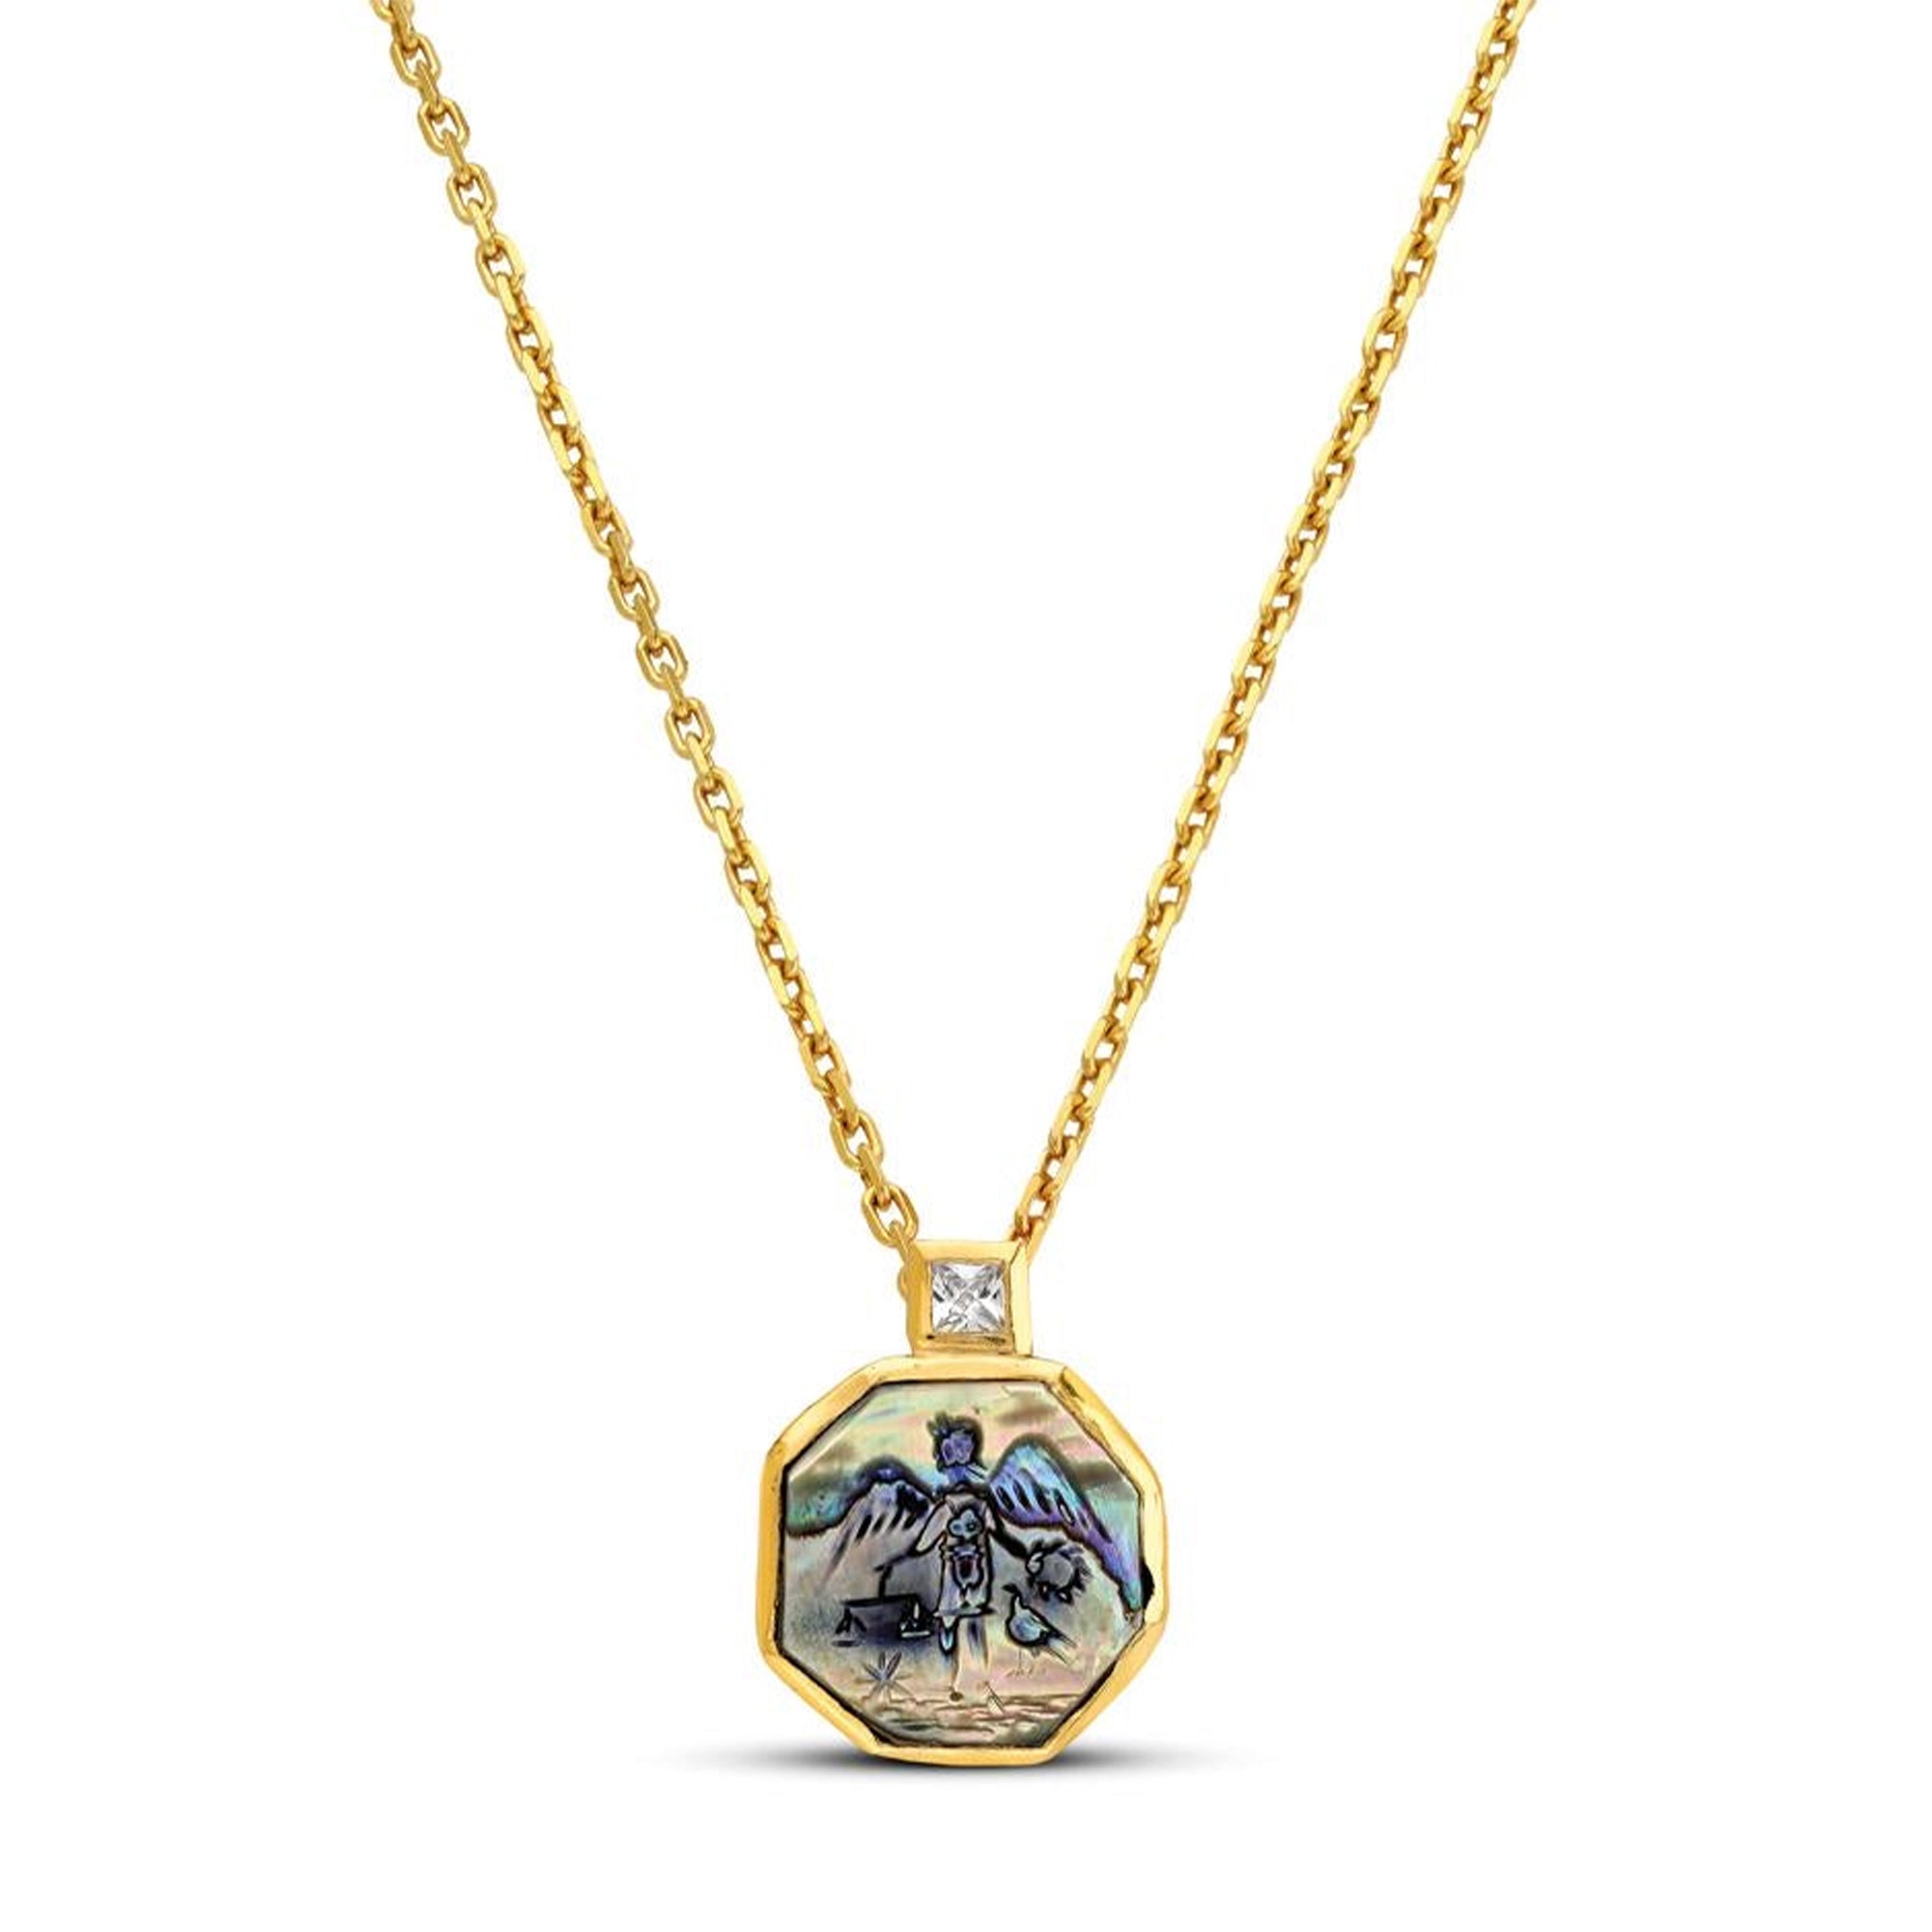 THE SKY ANGEL NECKLACE